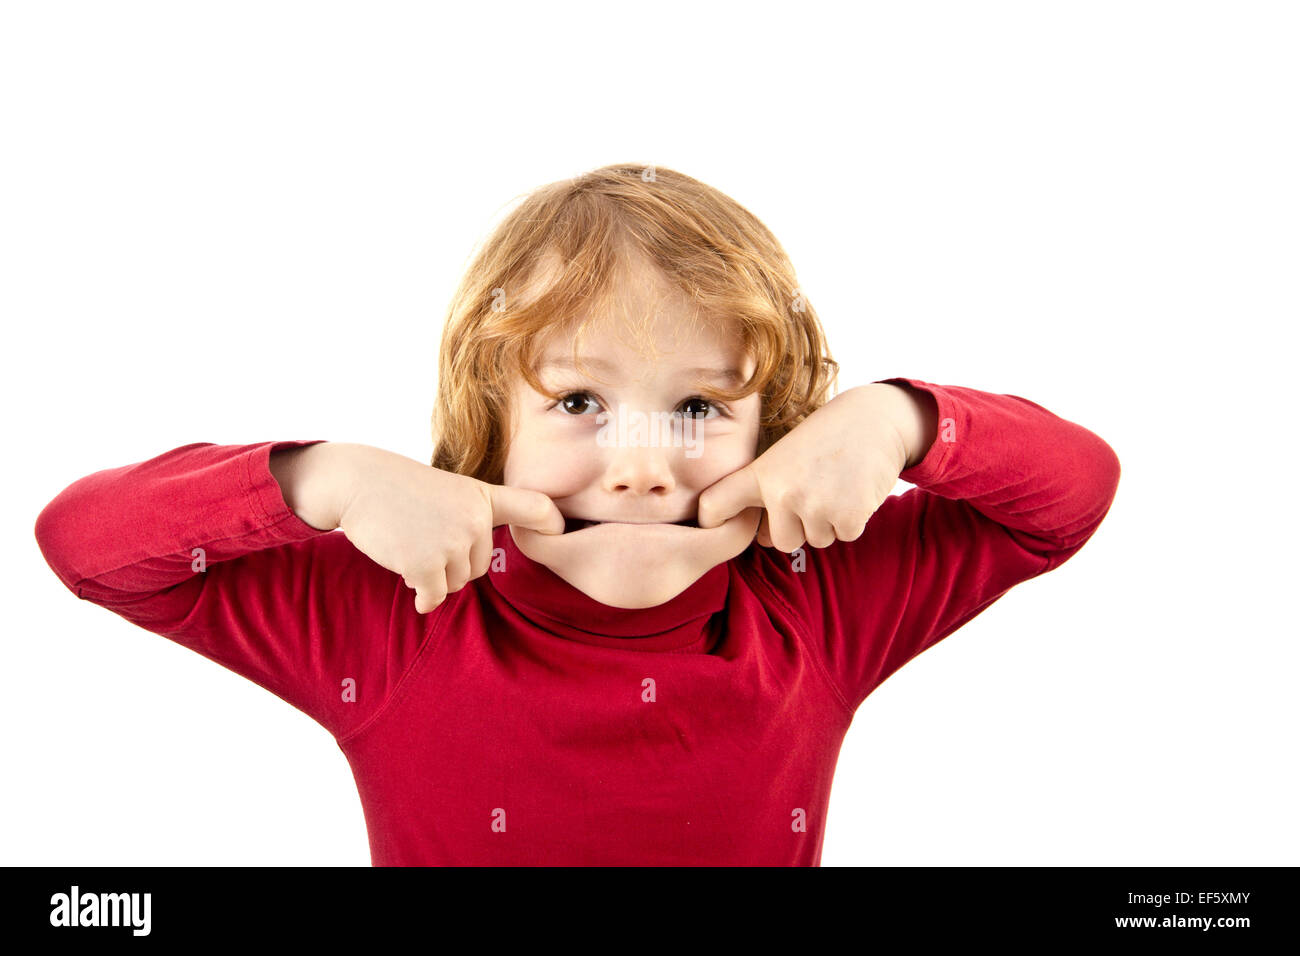 silly child pulling face isolated Stock Photo